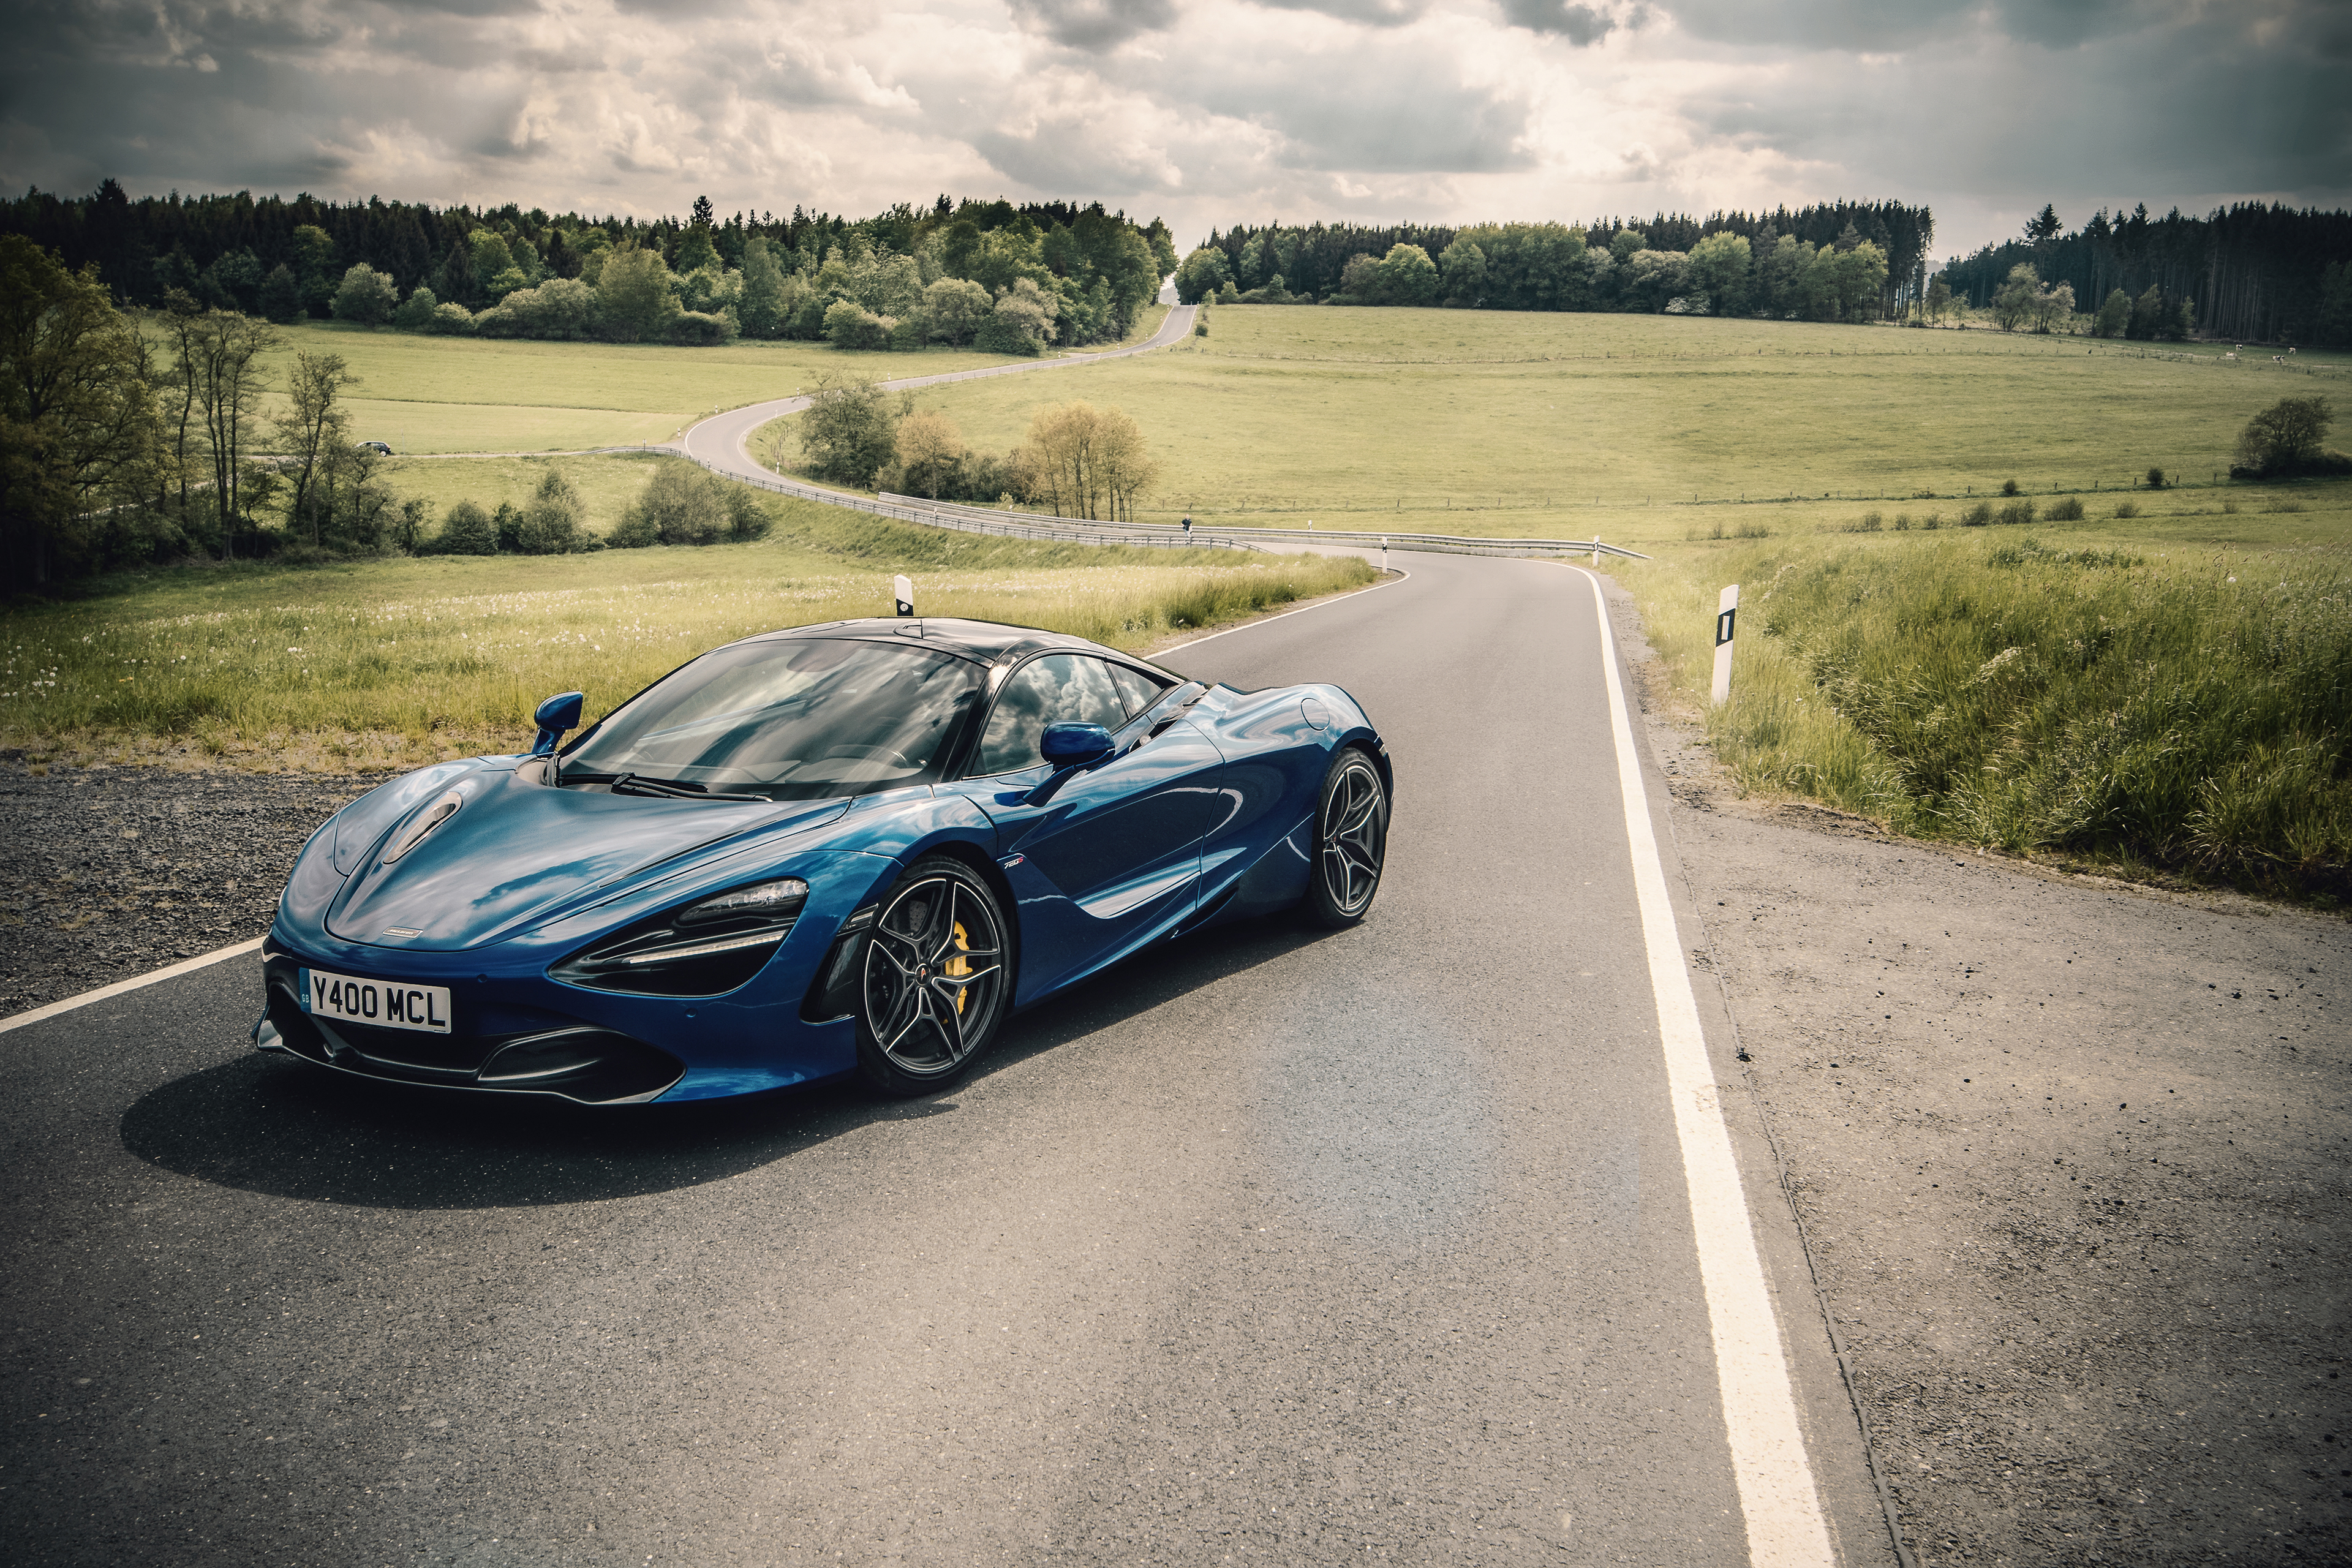 Free photo A blue Mclaren on the road.